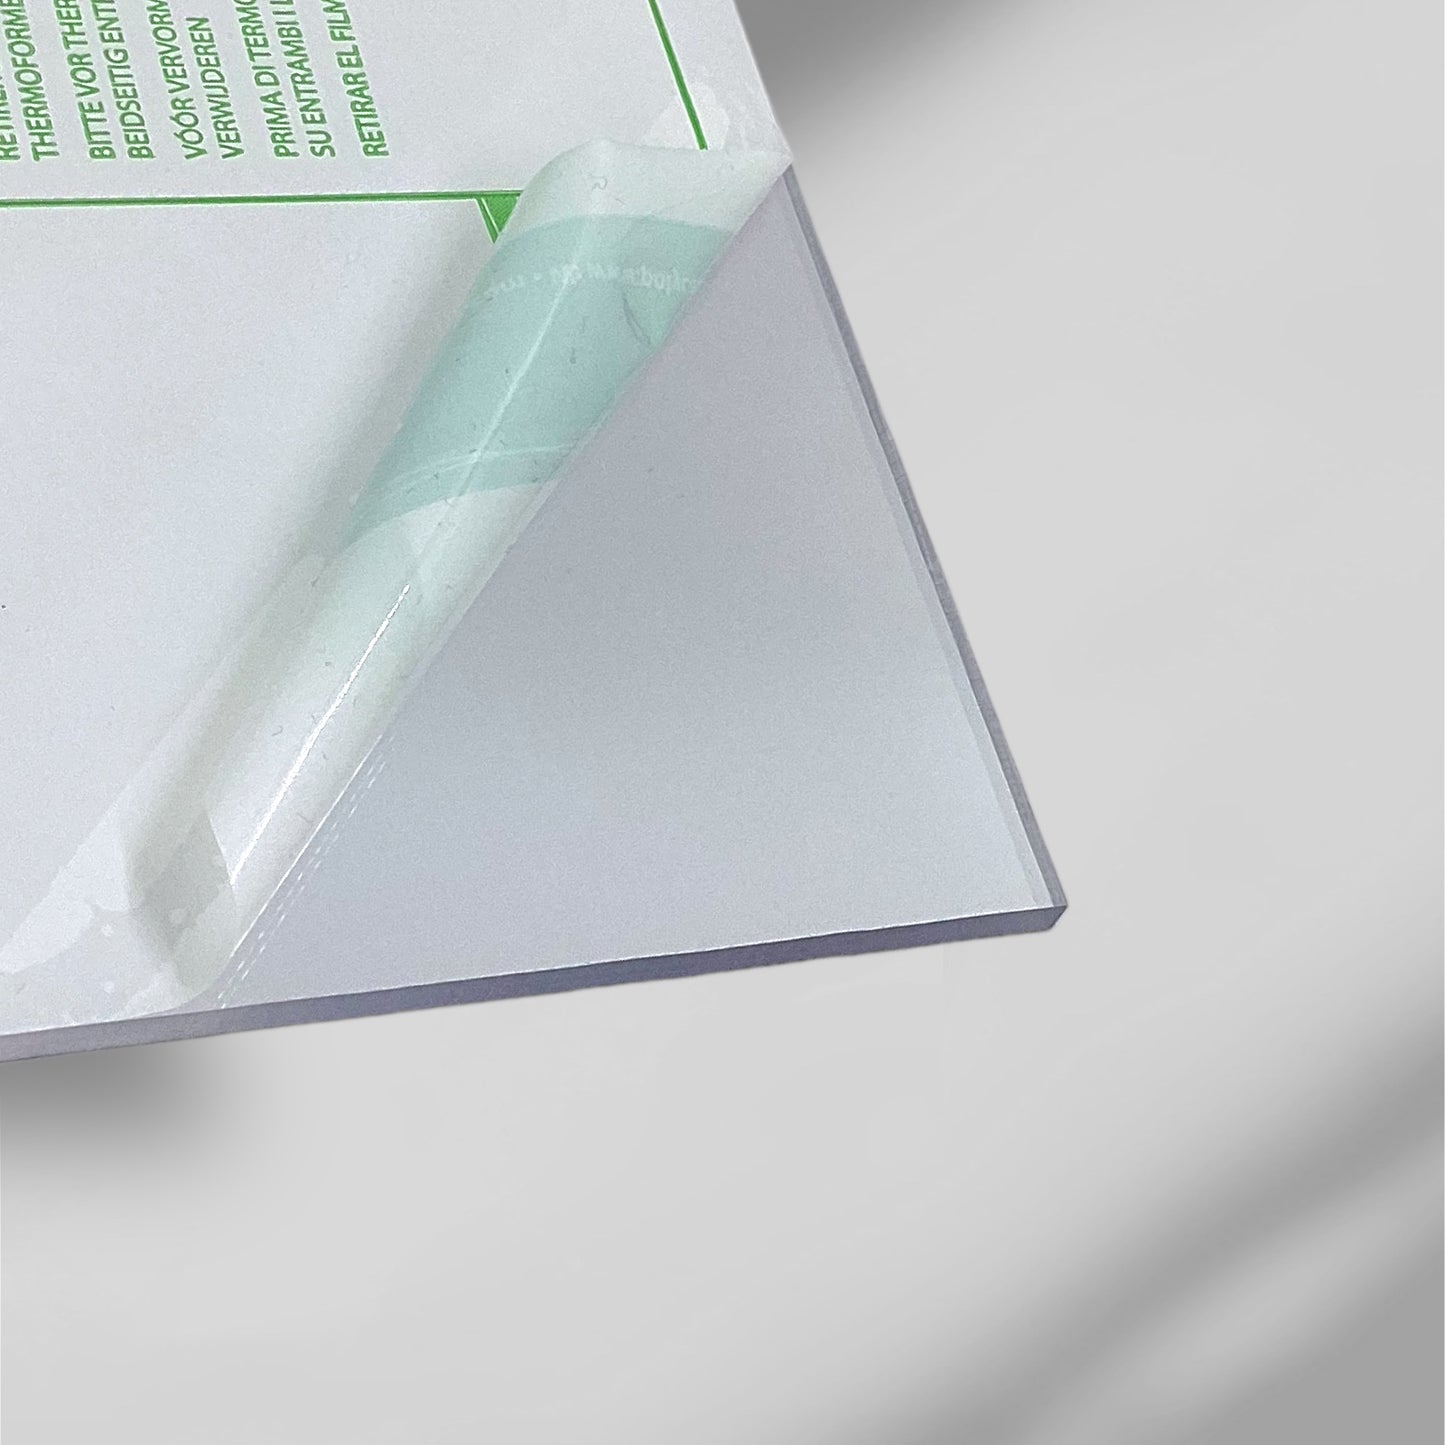 1/8" Clear Polycarbonate Sheet